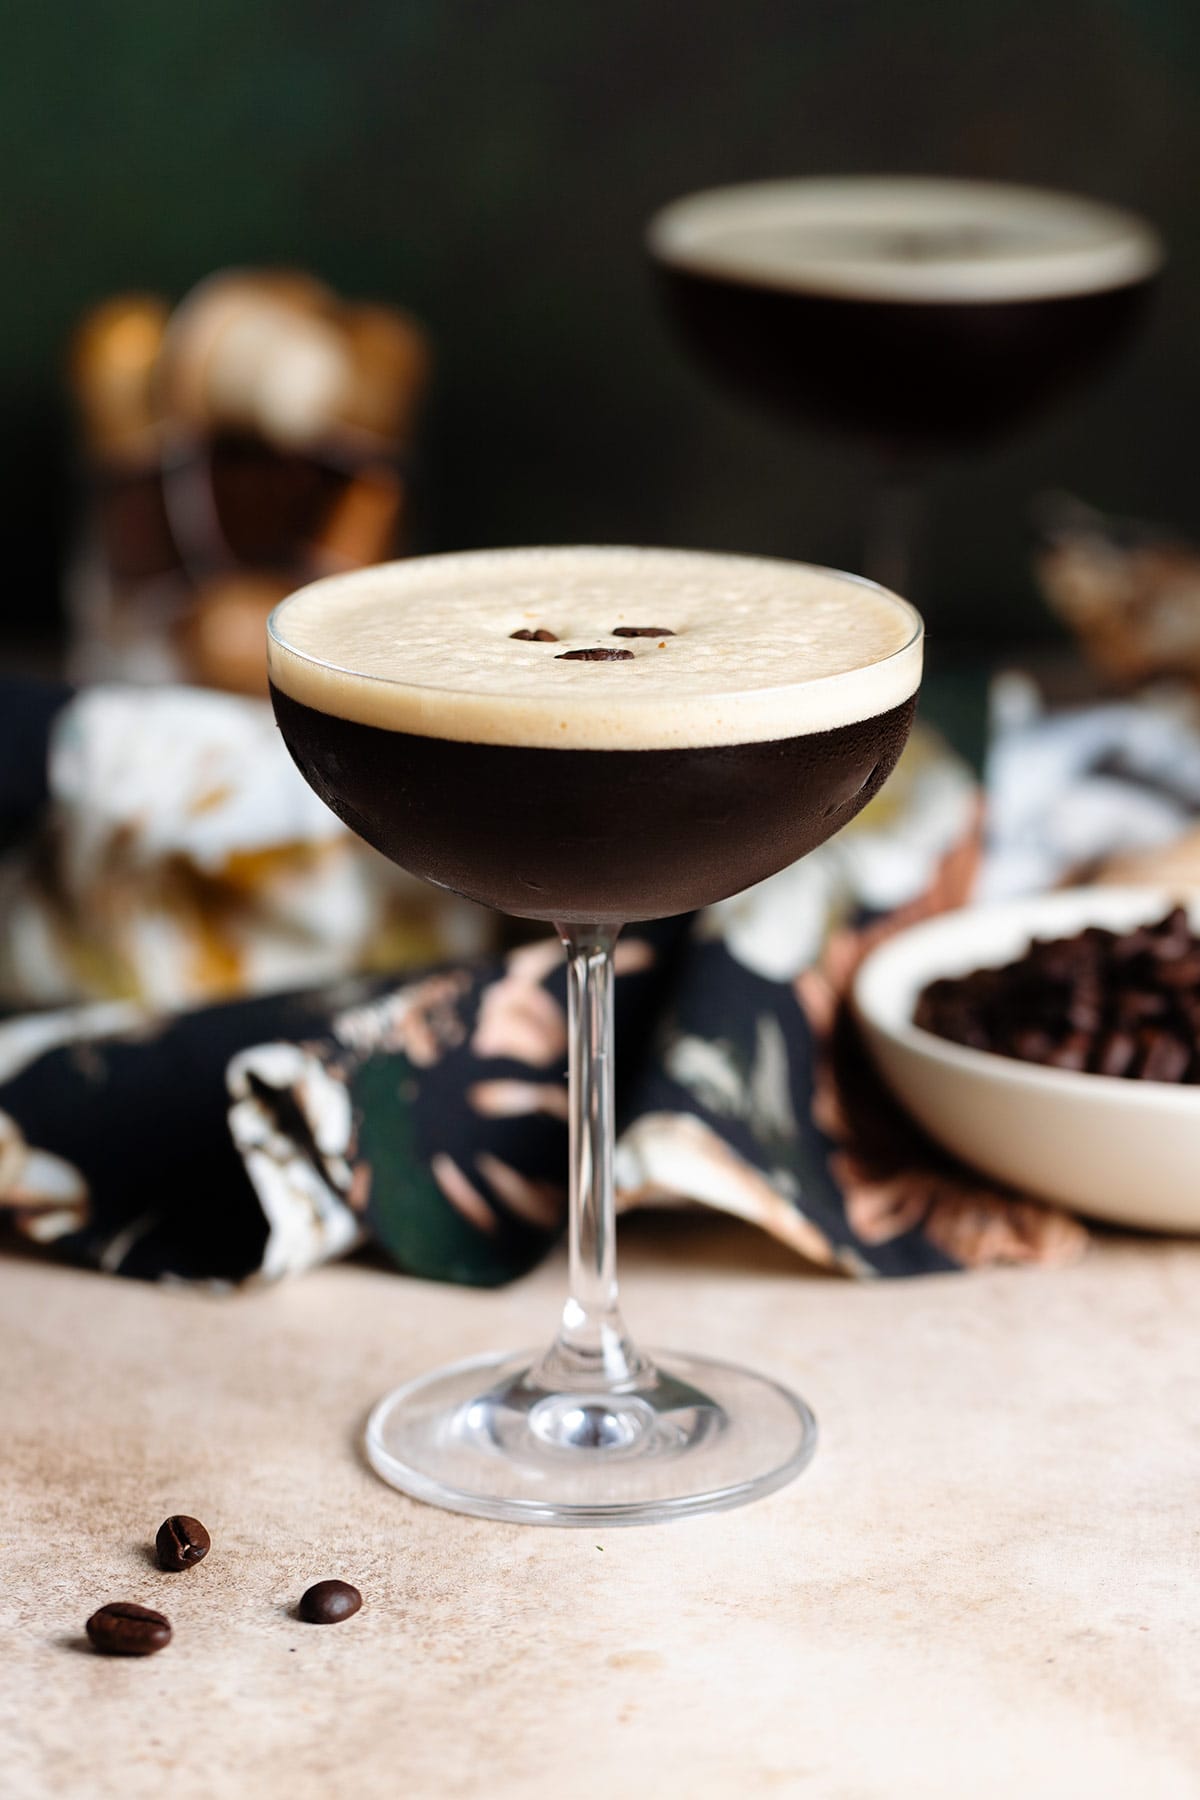 An espresso martini in a coupe glass with foam on top garnished with three coffee beans, another martini in the background, on a beige and dark green background.